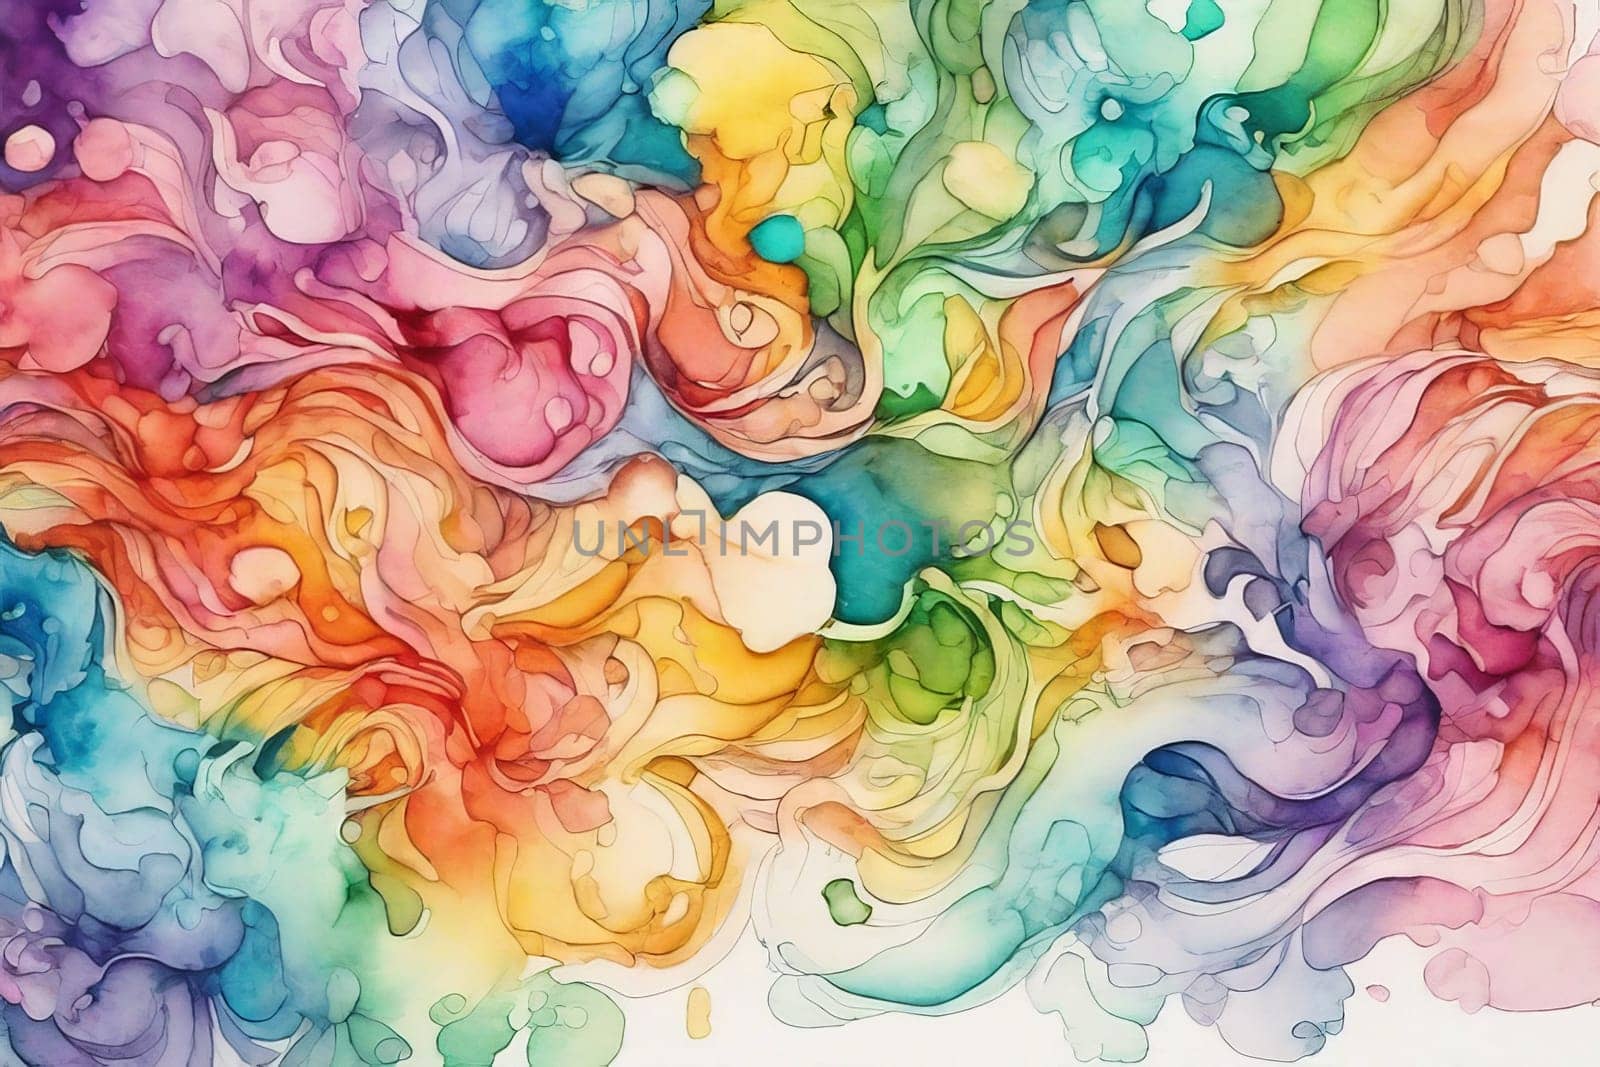 Abstract watercolor background in rainbow colors by Annu1tochka